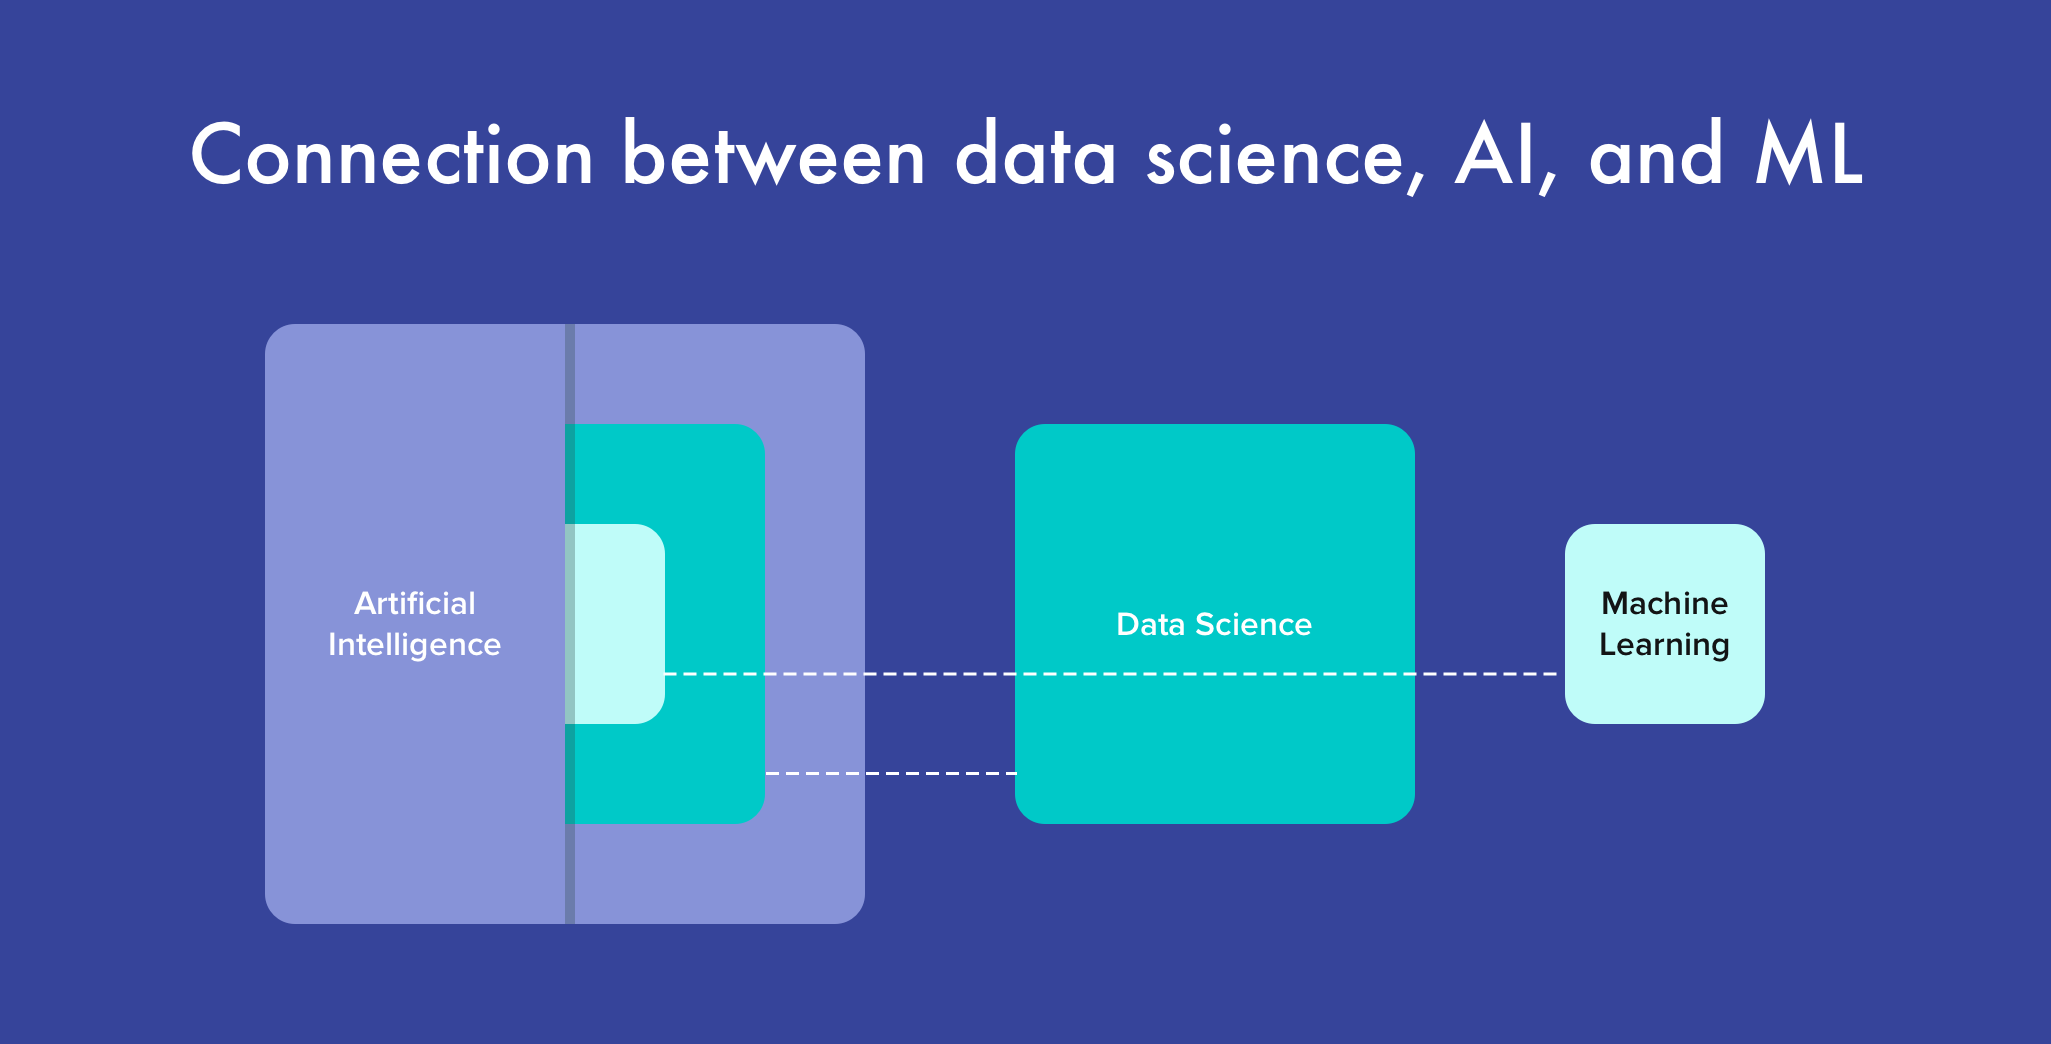 Connection between data science, AI, and ML